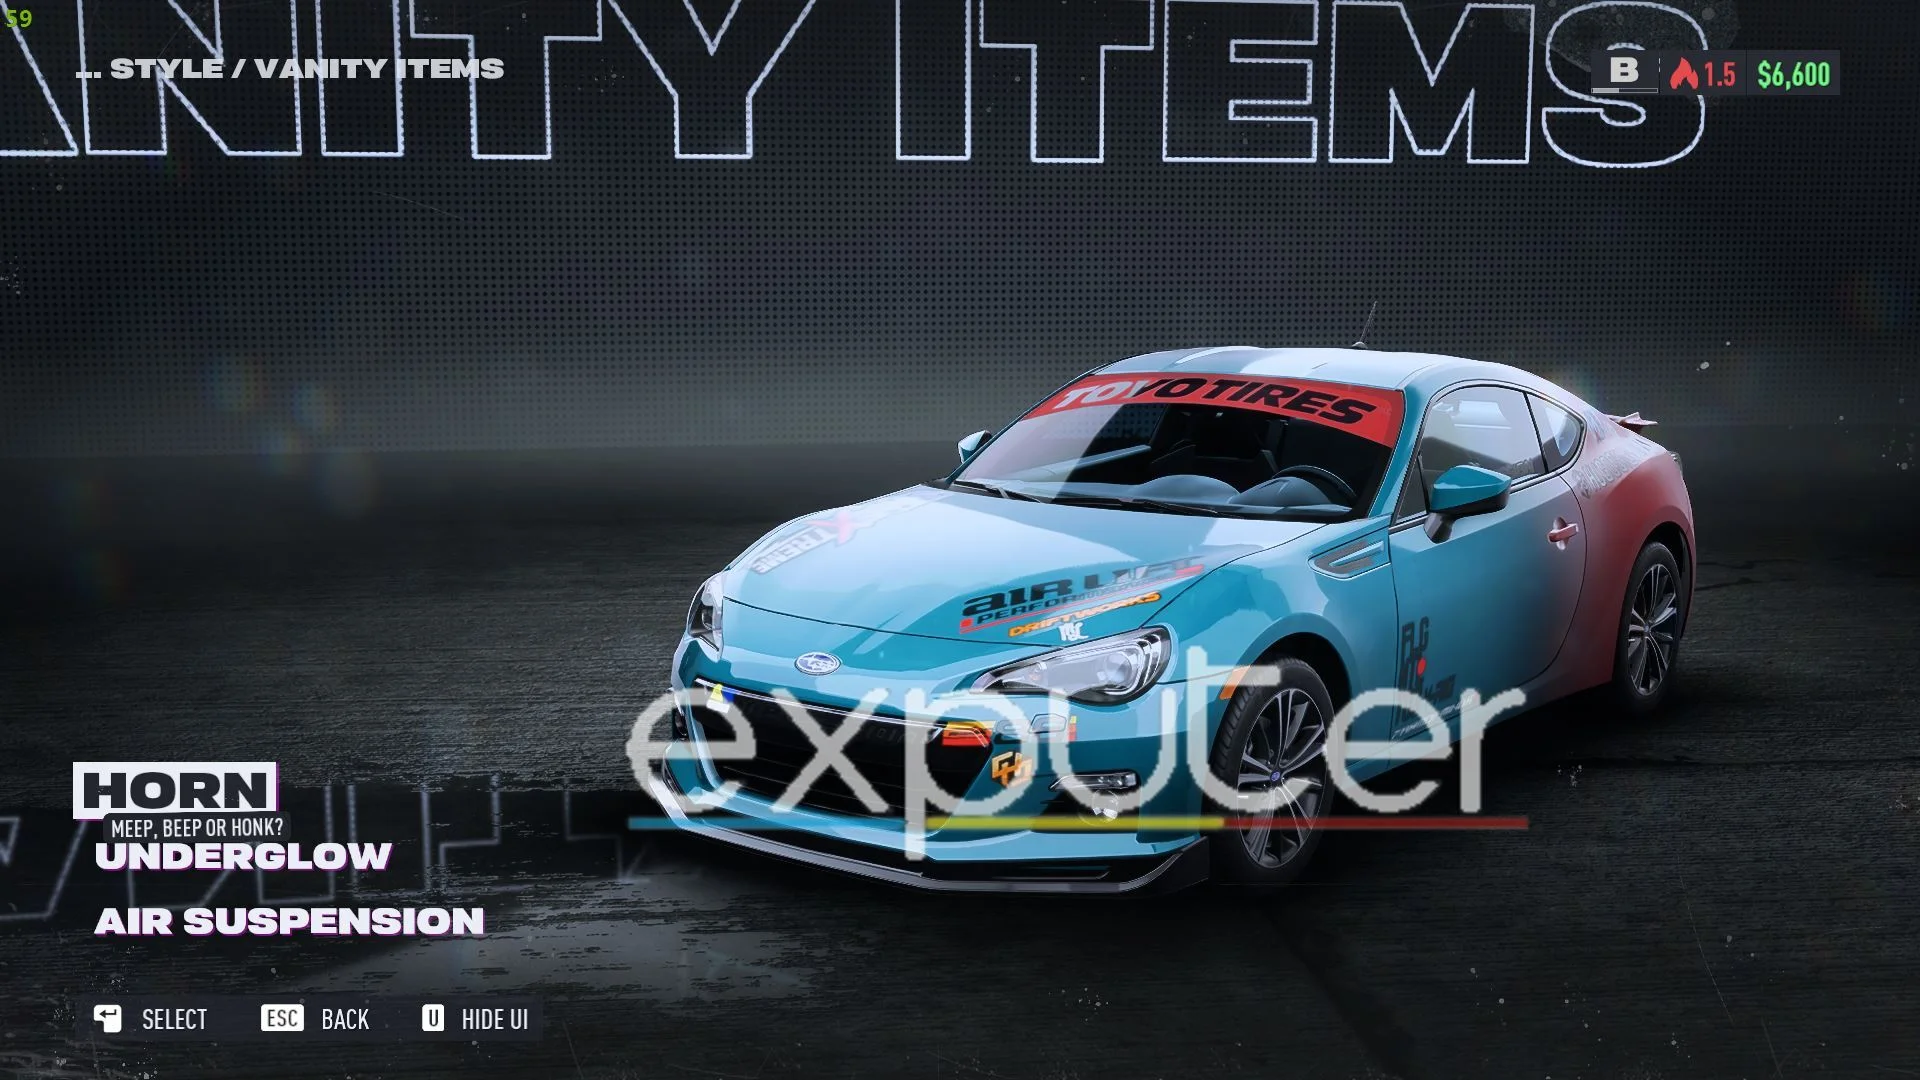 Need for Speed Unbound Best Drift Car: This build will make you a Drift King